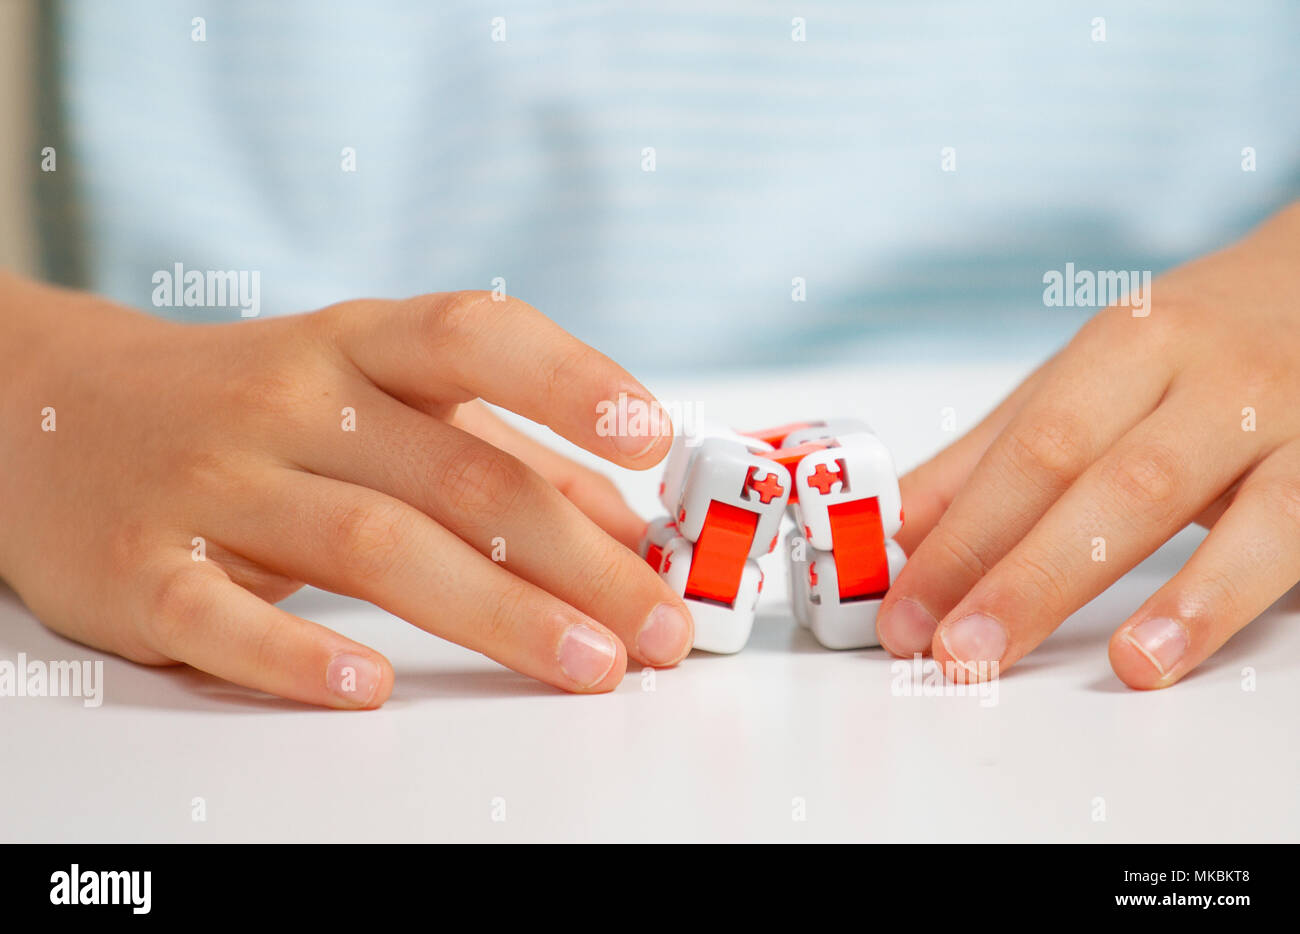 Colorful fingers antistress toy in child hand Stock Photo